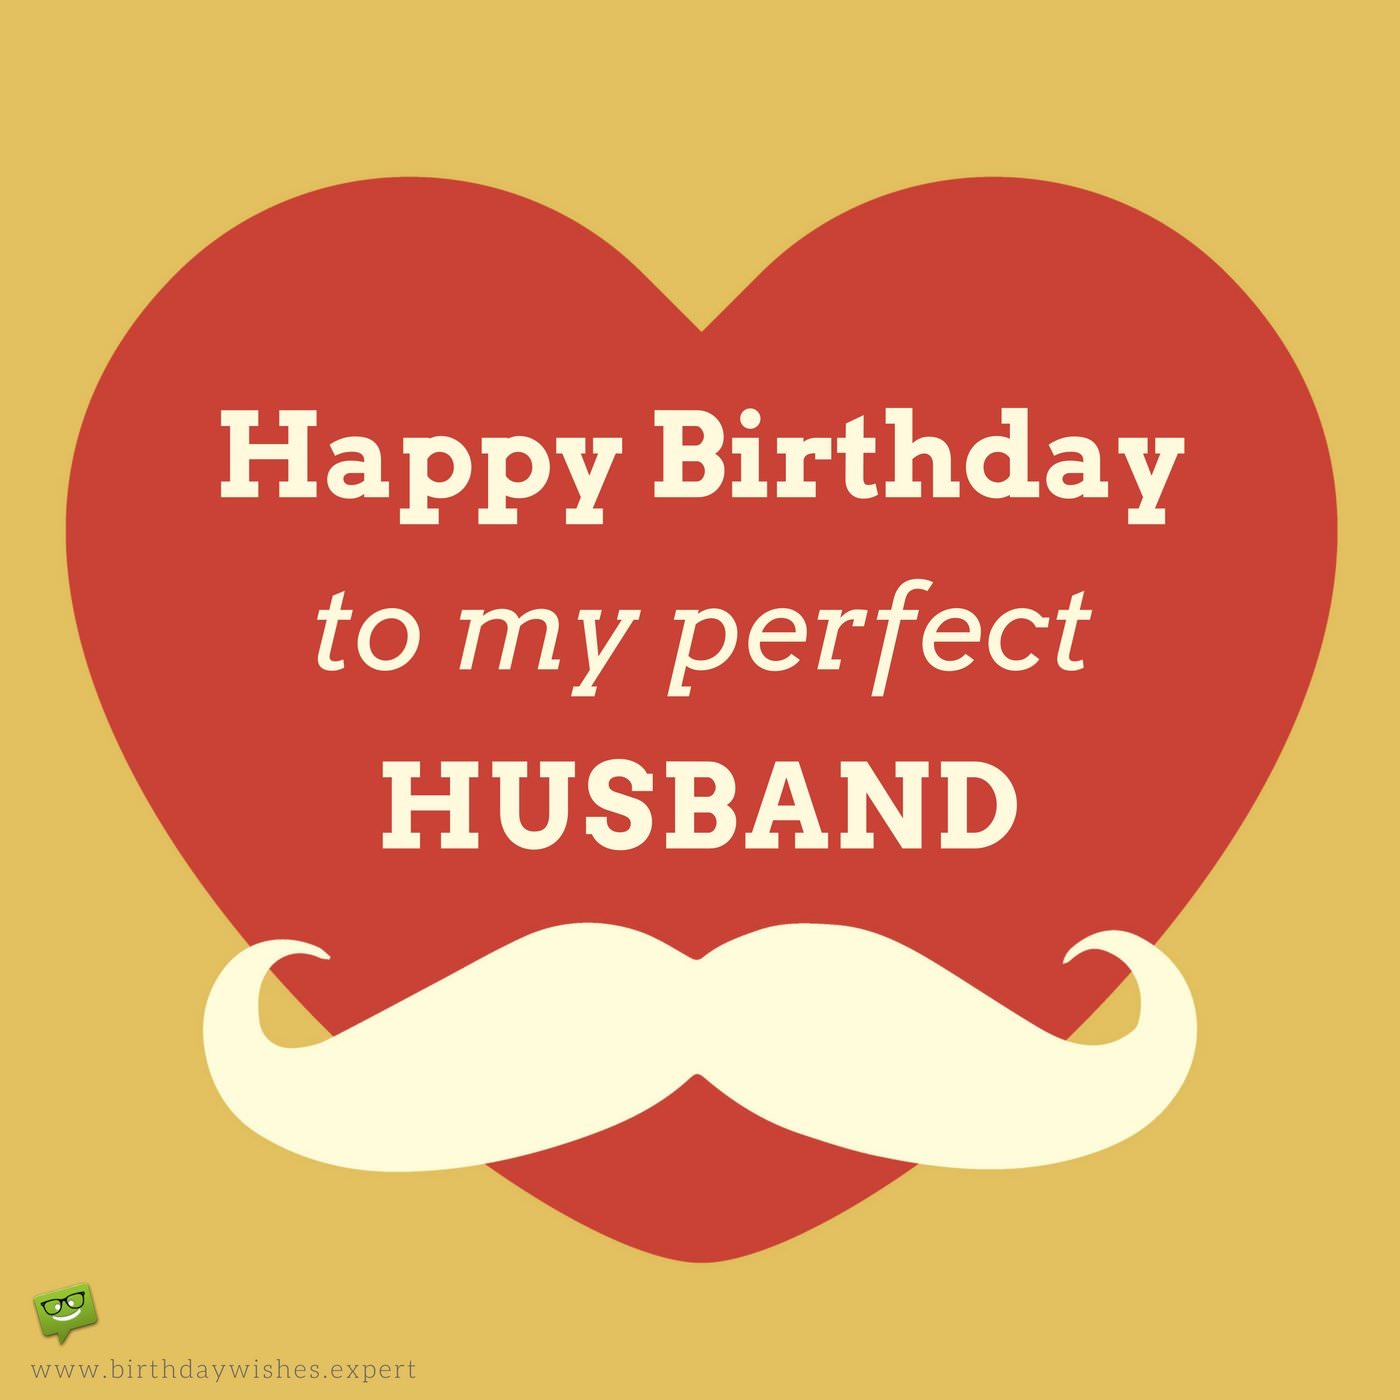 Quotes On Birthday Wishes For Husband - Cocharity